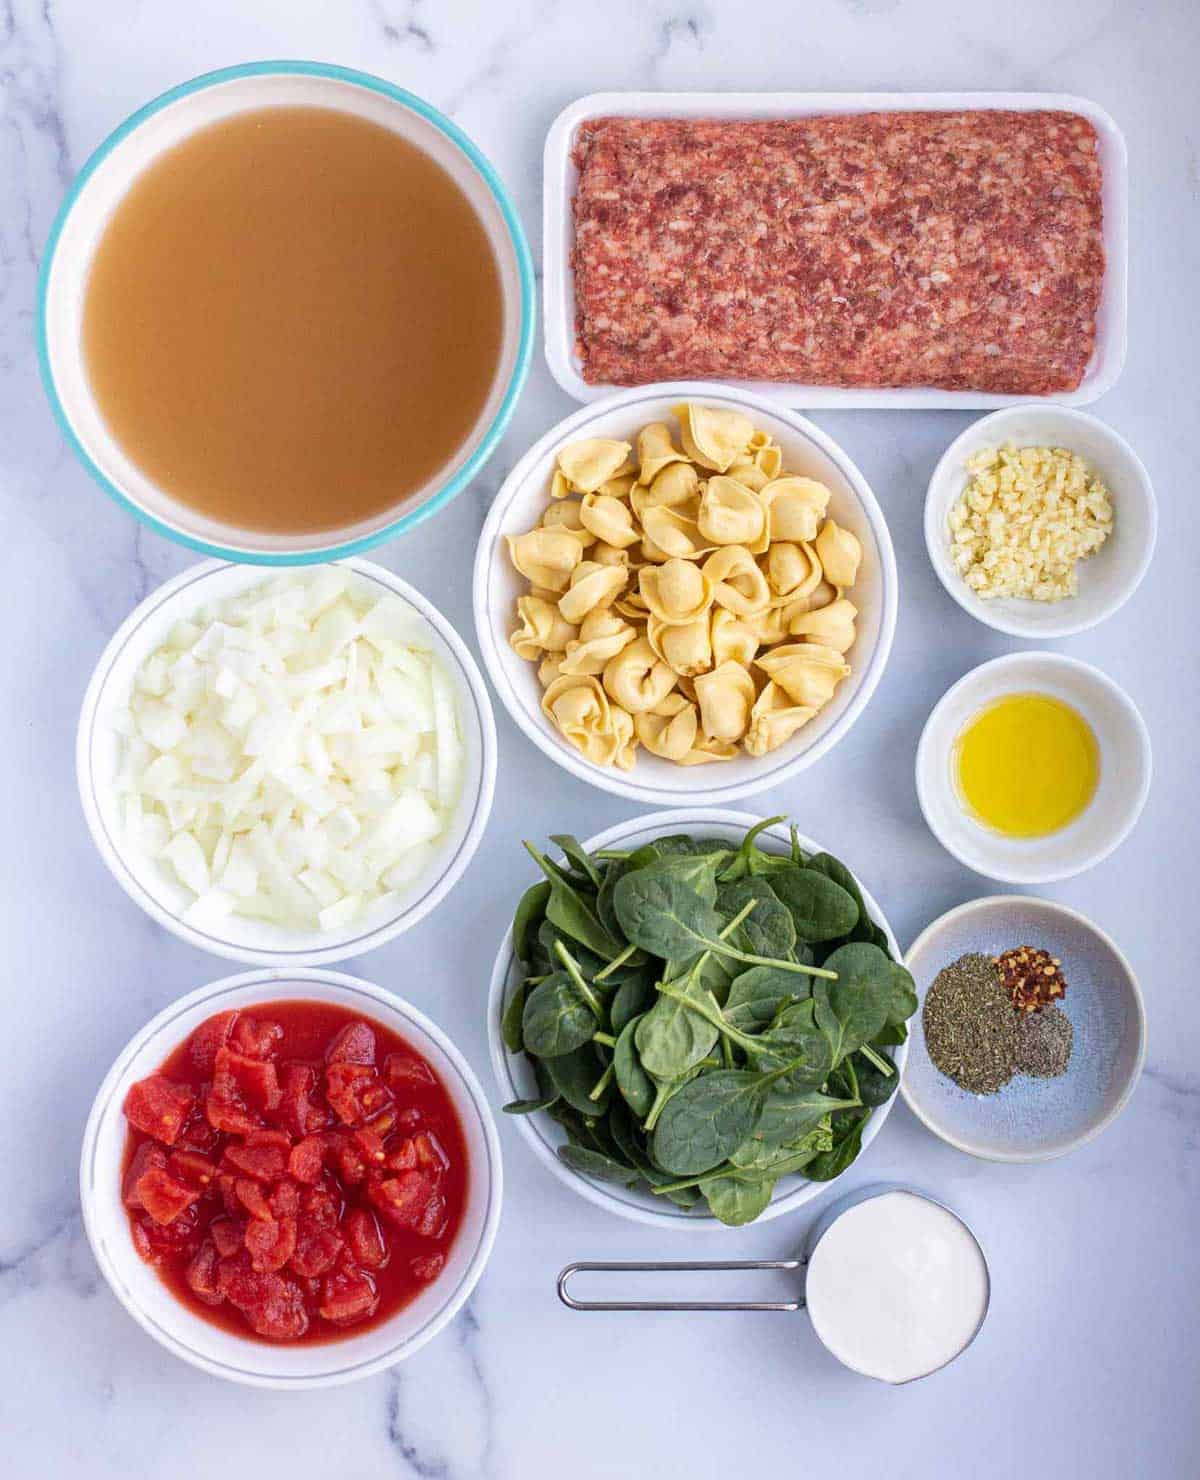 Instant Pot Tortellini Soup ingredients: chicken broth, Italian sausage, cheese tortellini, diced yellow onion, minced garlic, olive oil, fresh baby spinach, diced tomatoes, ground black pepper, crushed red pepper, Italian seasoning, and heavy whipping cream.